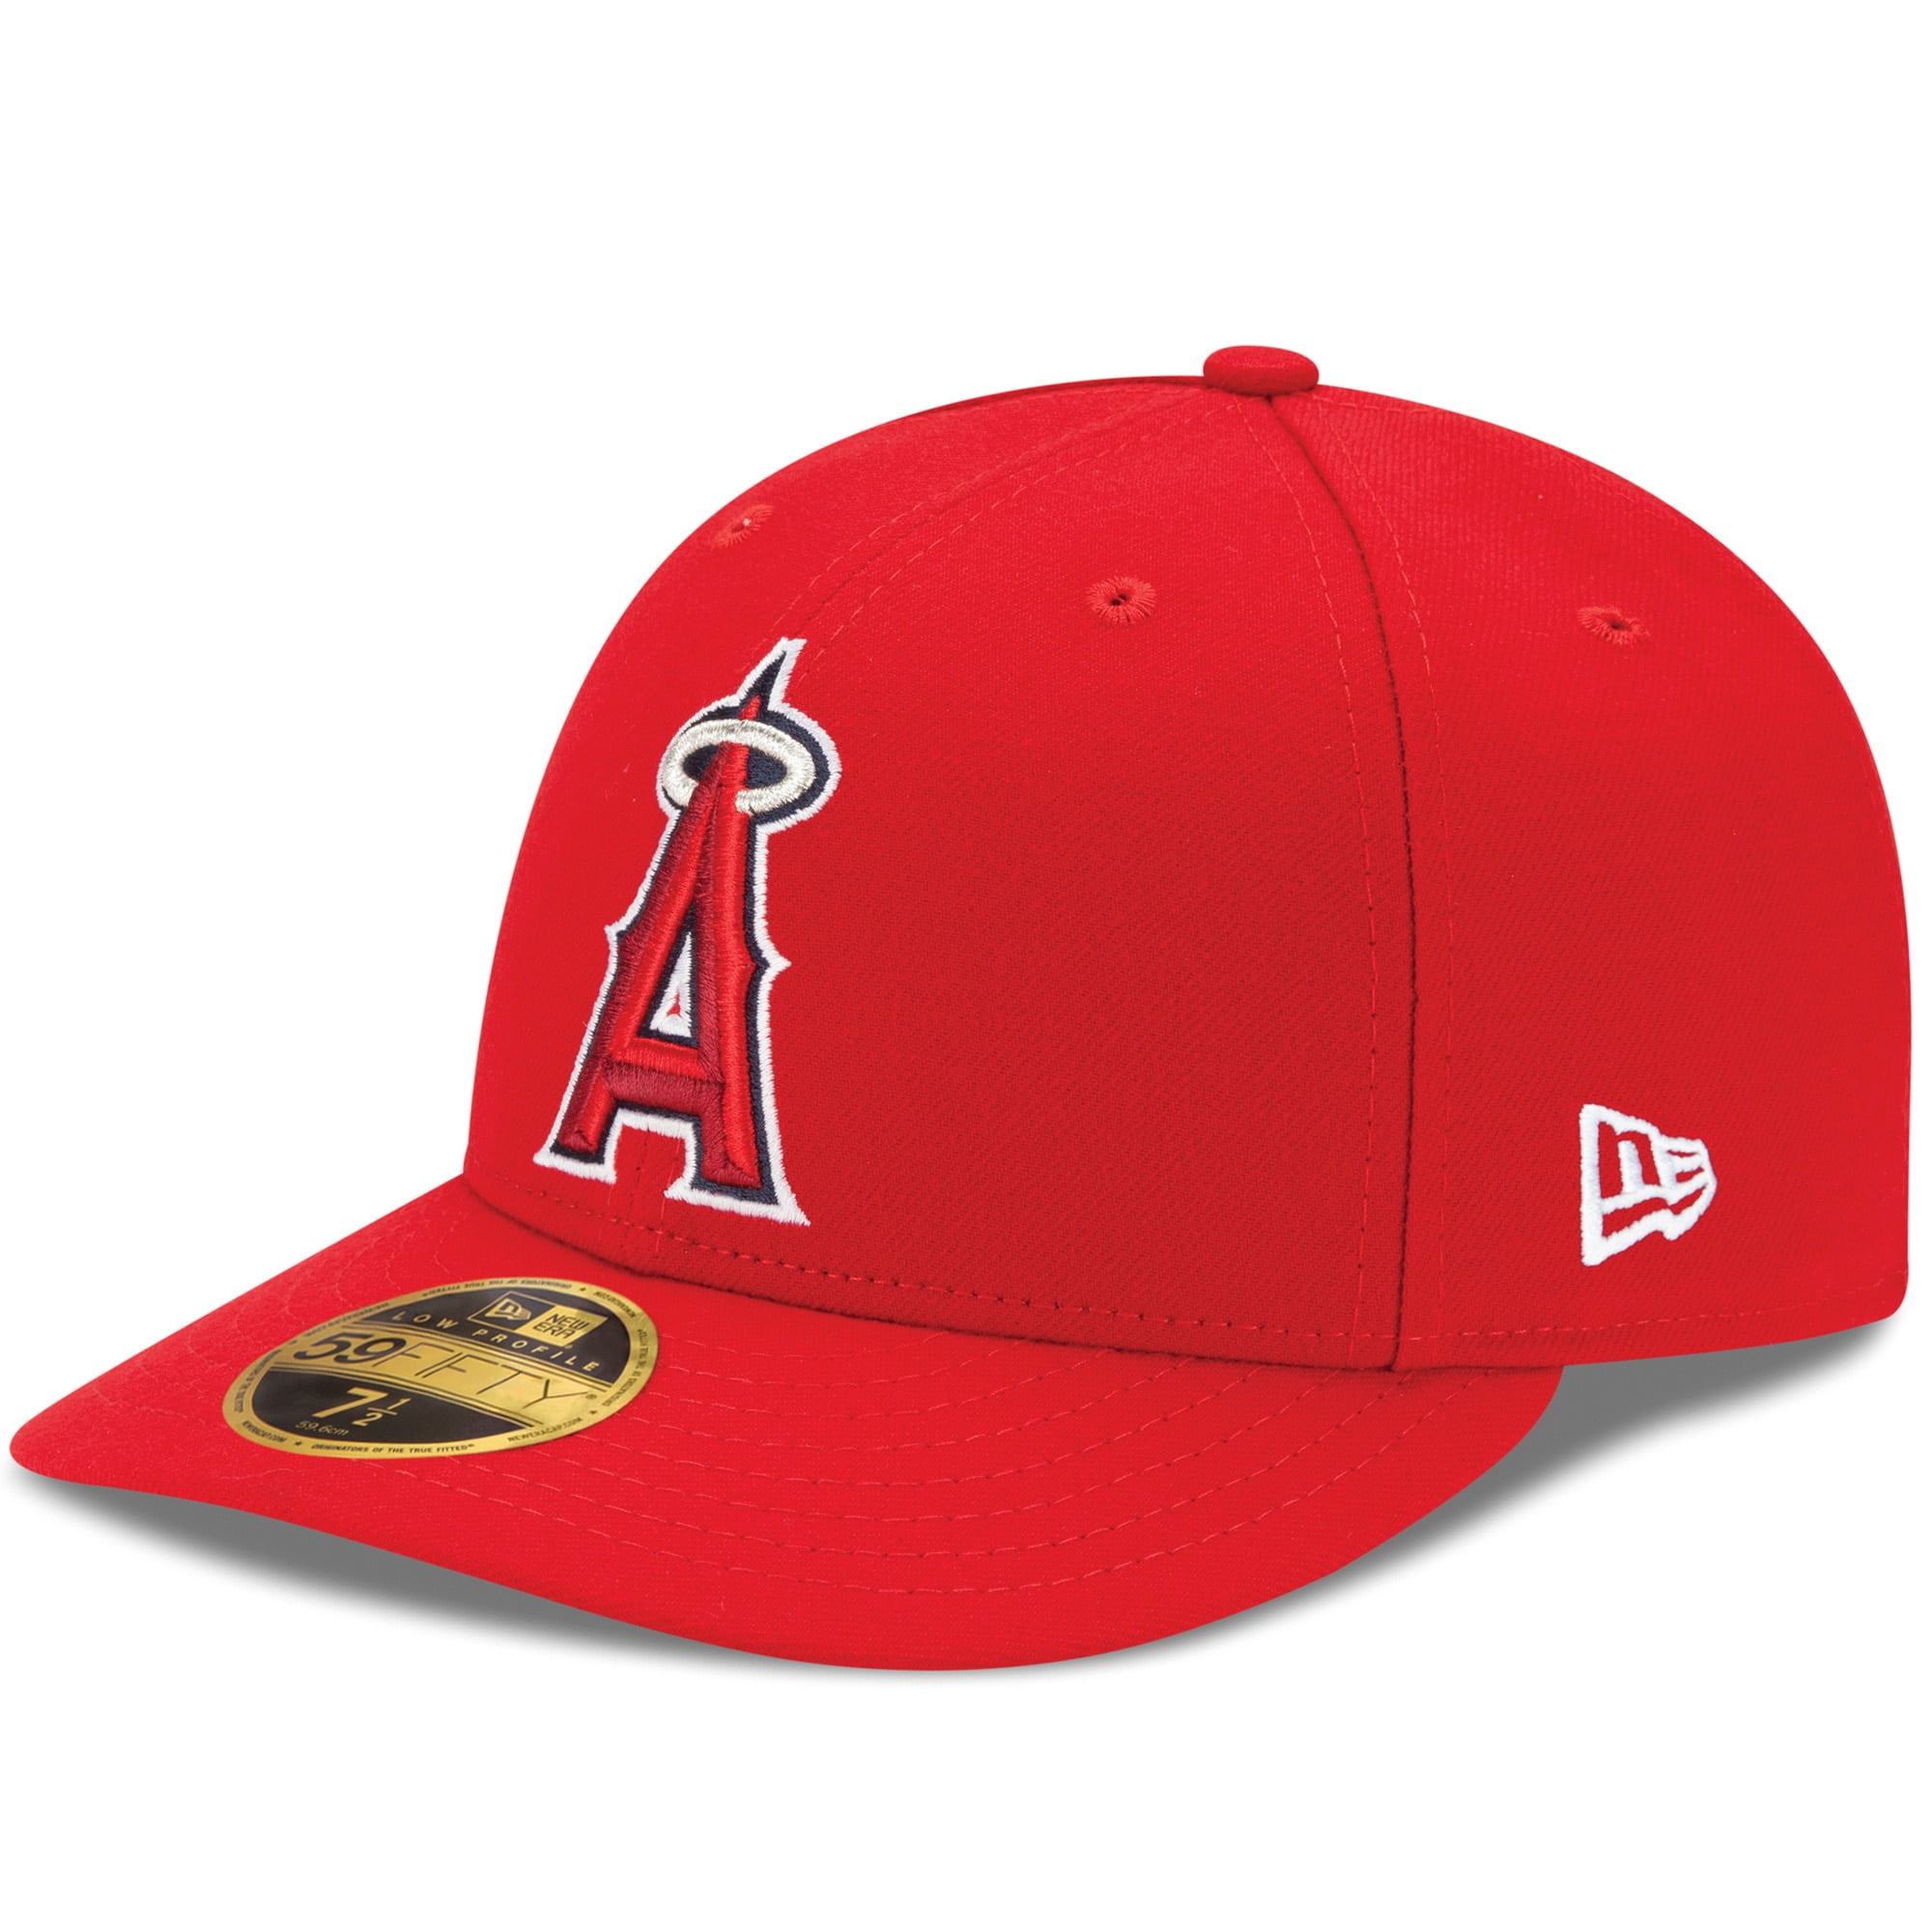 Men's New Era Red Los Angeles Angels Alt Authentic Collection On